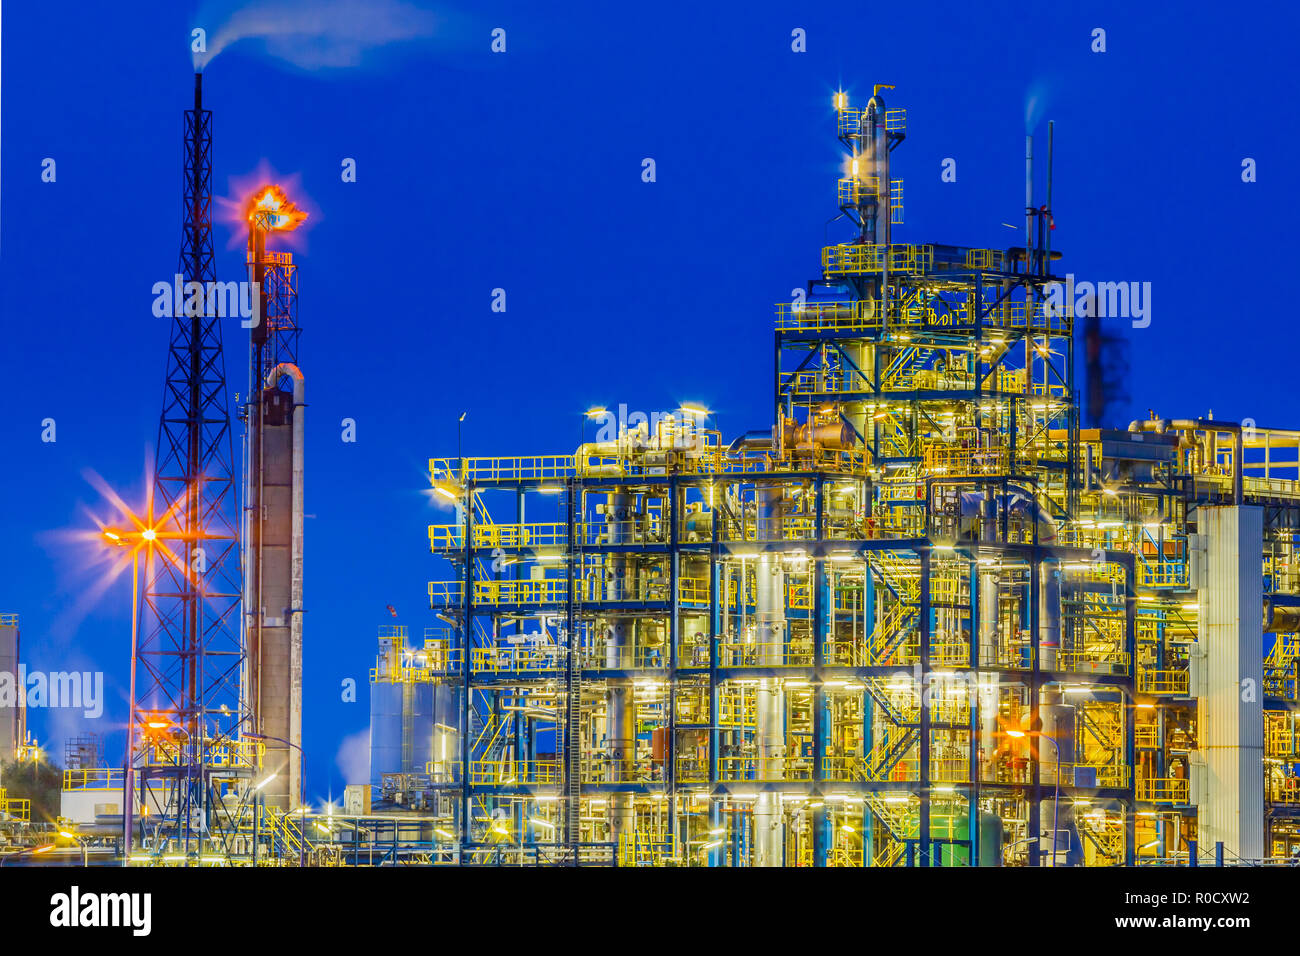 Night scene of a heavy Chemical Industrial plant framework with maze of tubes and pipes during twilight Stock Photo